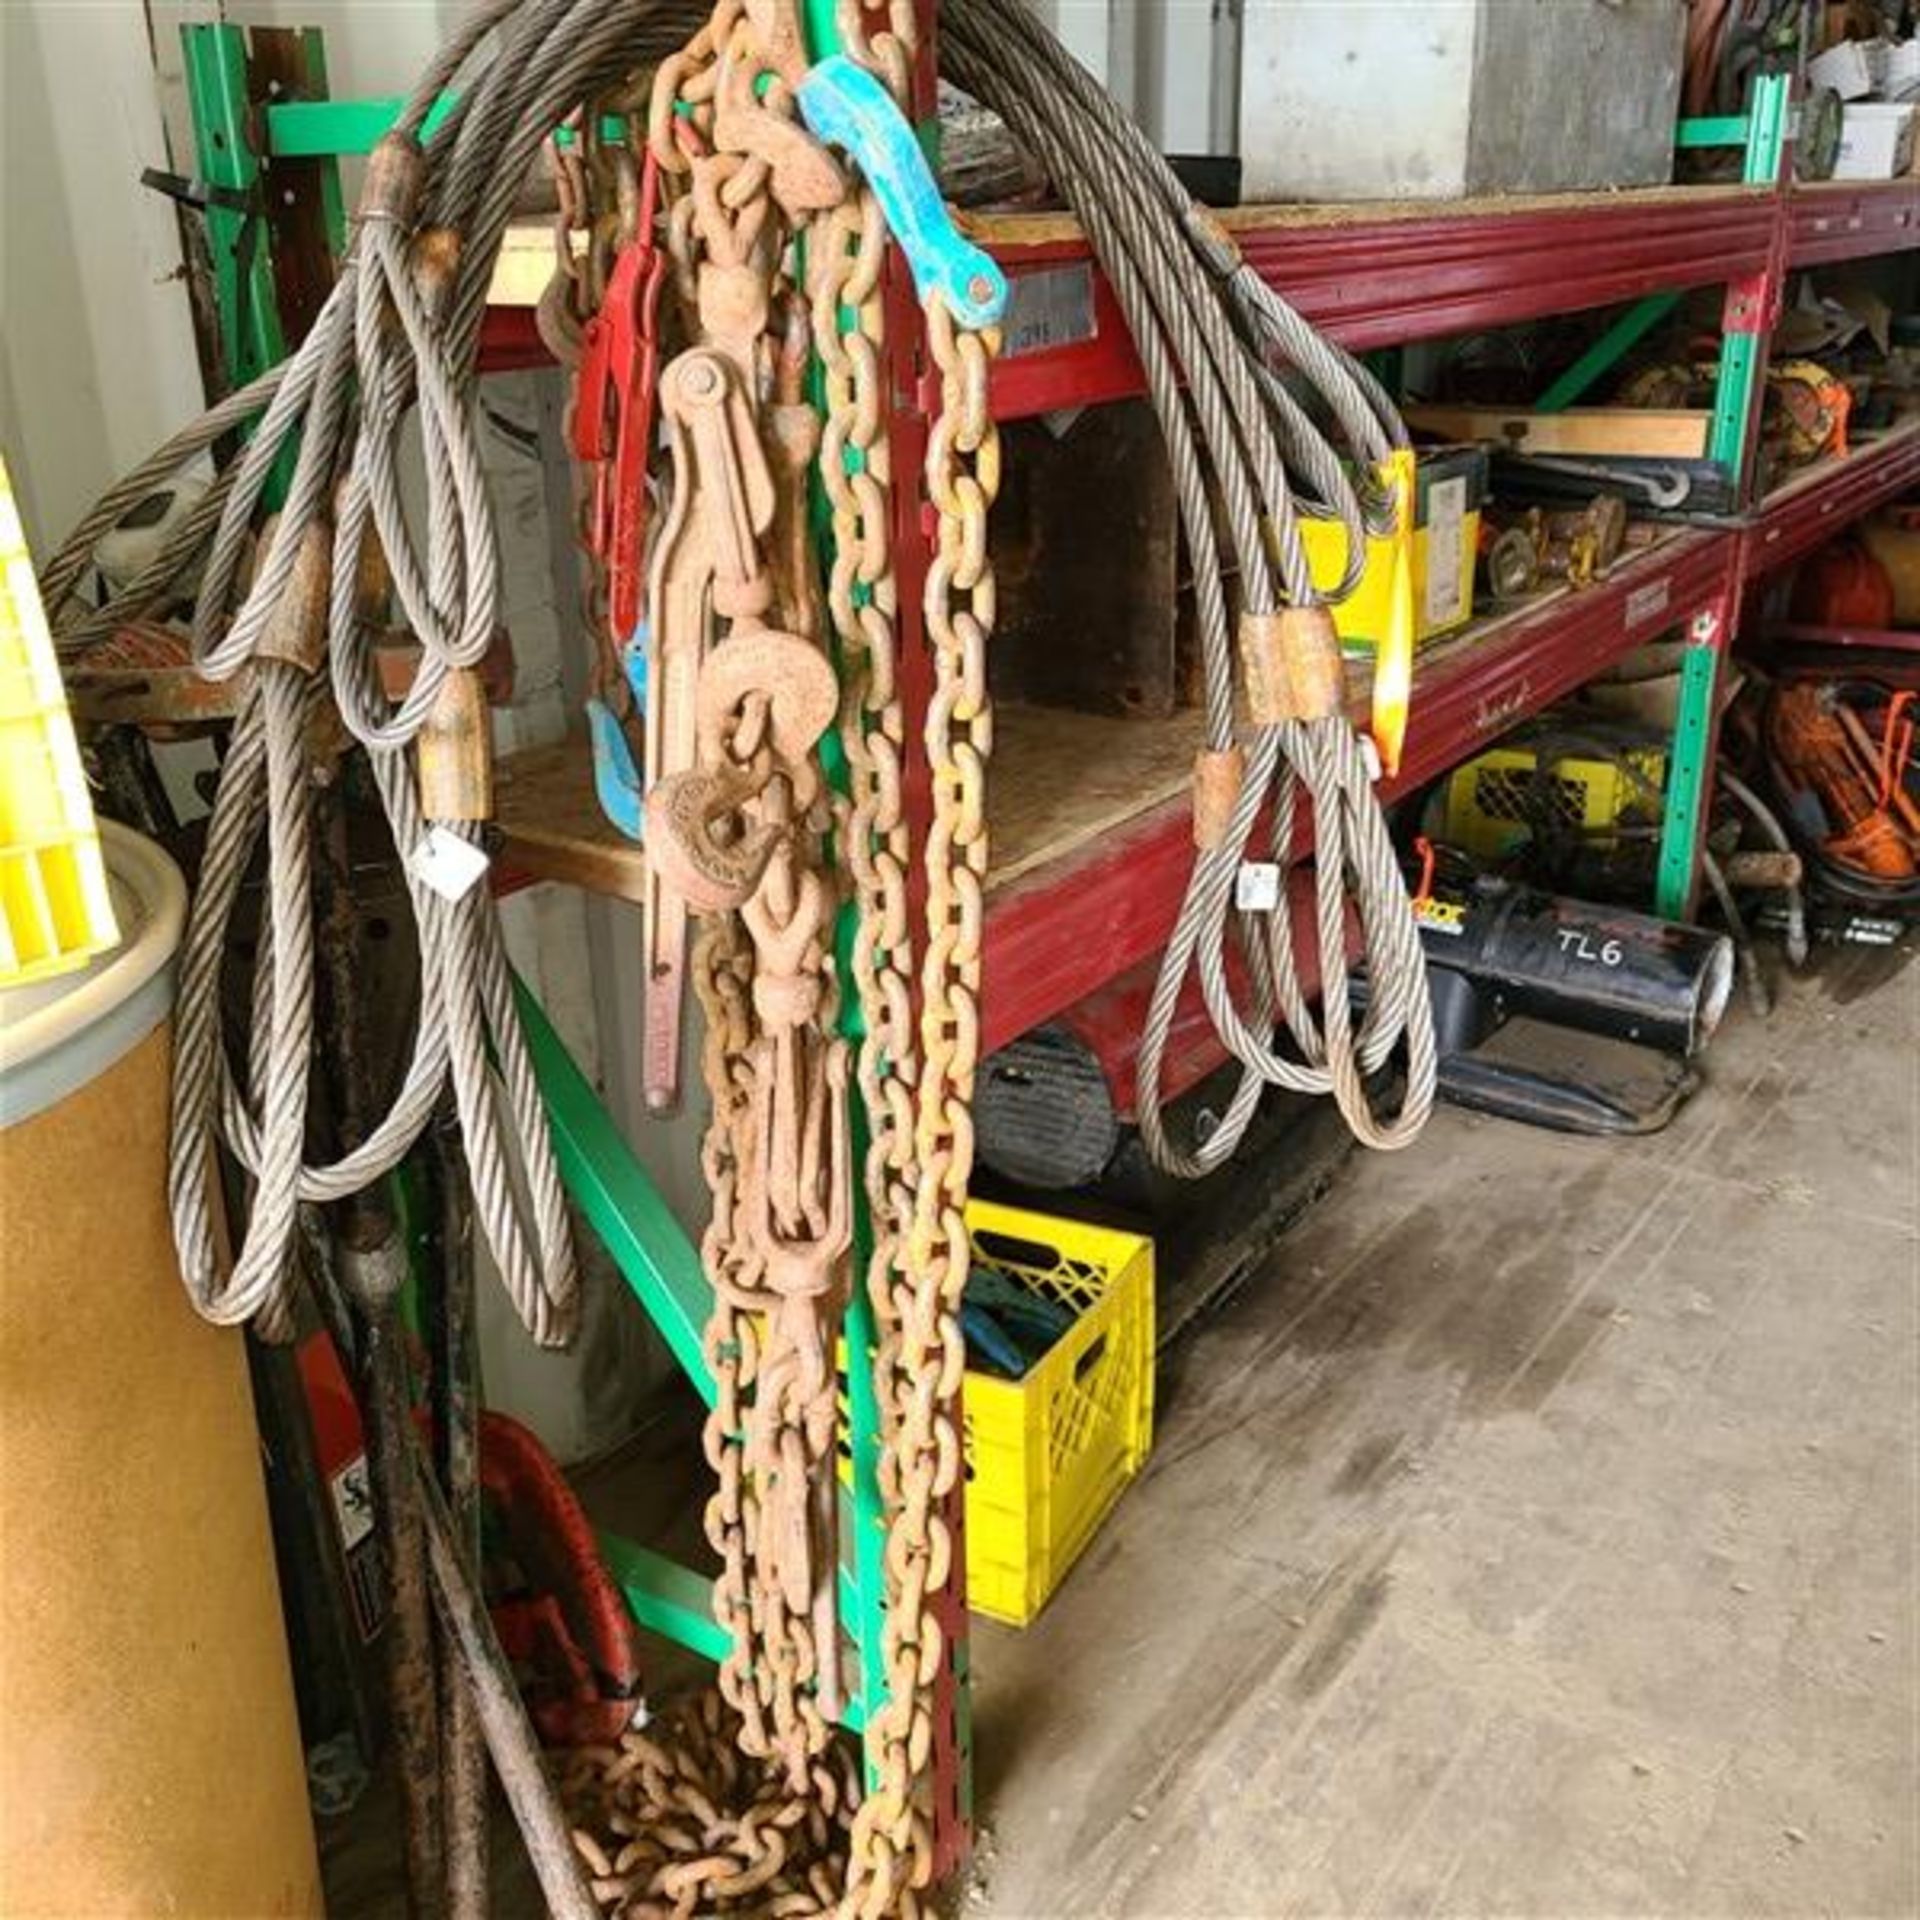 CONTENTS OF BLUE SEACAN CONTAINER, REEL OF ROPE, TIRES, SLINGS ETC. - Image 5 of 15